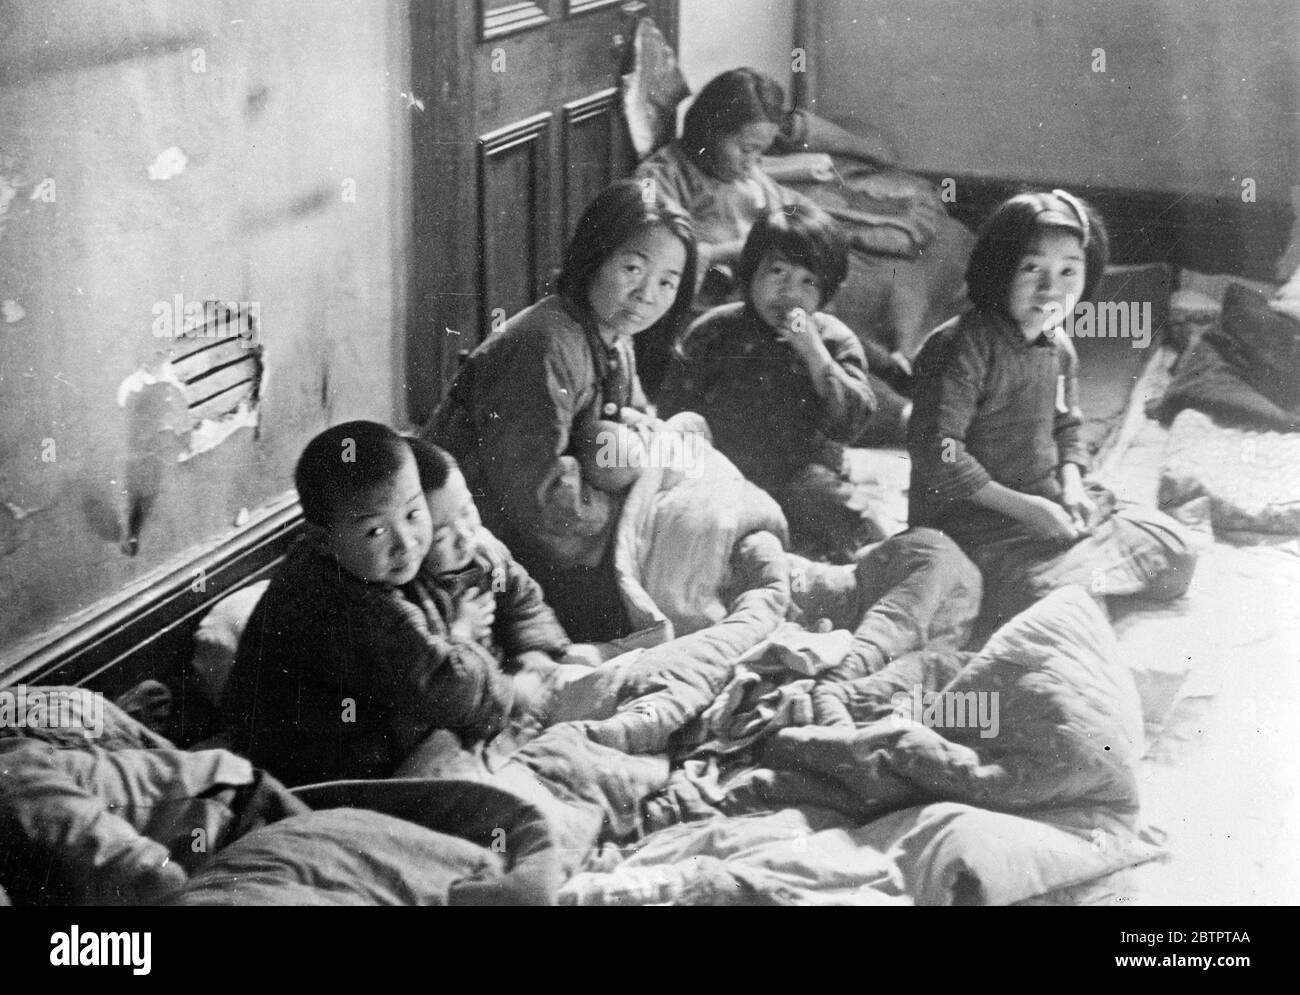 Christmas comes to China. A Chinese family, huddled together for warmth beneath the few blankets and rugs salvaged from their bombed time, Crouch, despondent in the corner of a room at Shanghai refugee camp. Although the Christmas season approaches this family, like many in the China war zones, knows nothing of goodwill. A few handfuls of rice forms their meagre rations. Japanese armoured cars had taken the place of Father Christmas and his slaves. 19 December 1937 Stock Photo